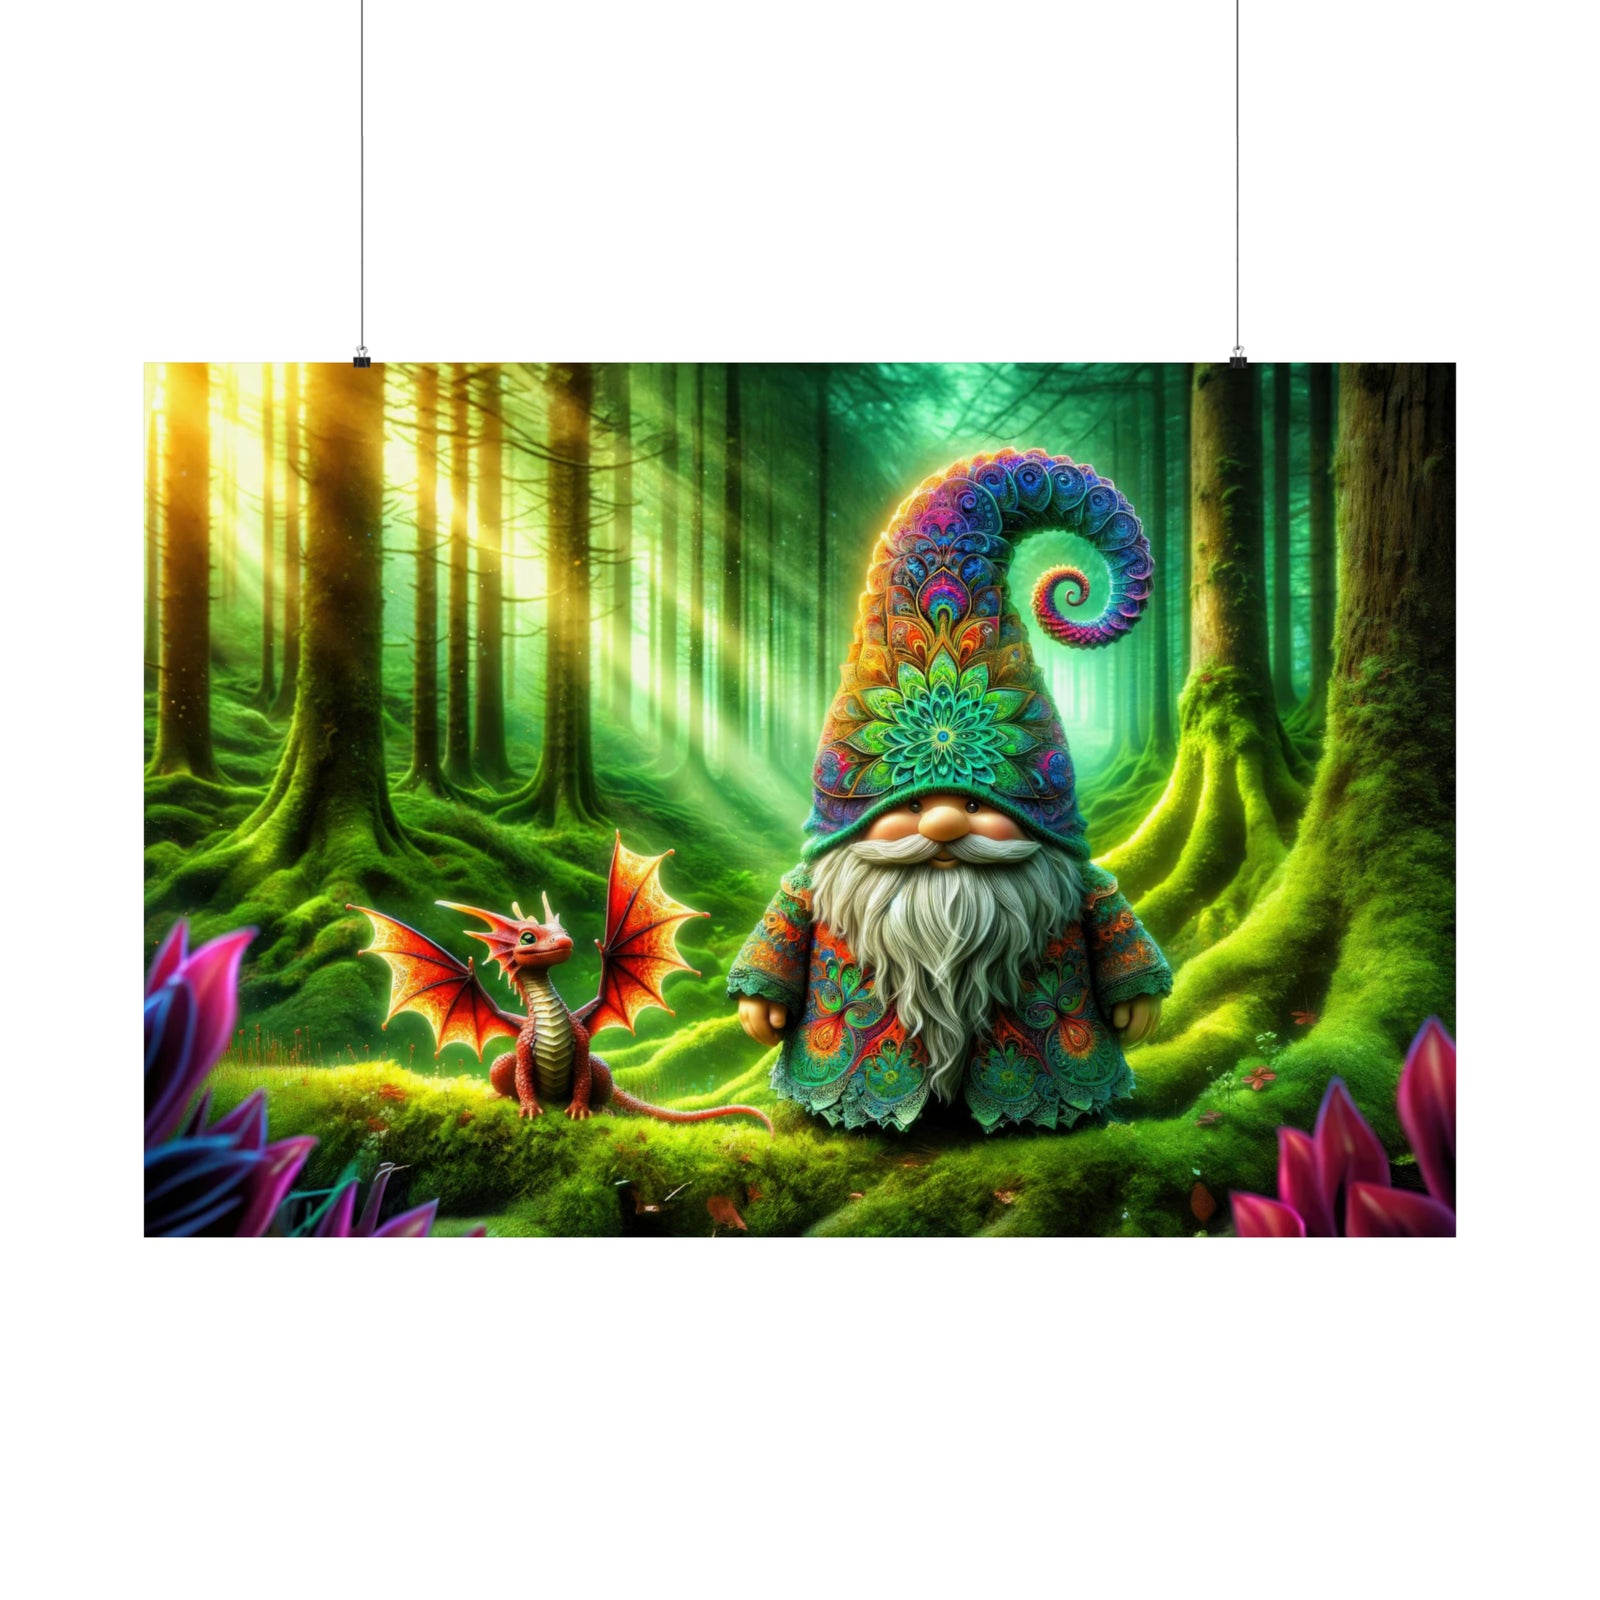 The Gnome's Enchanted Morn Poster